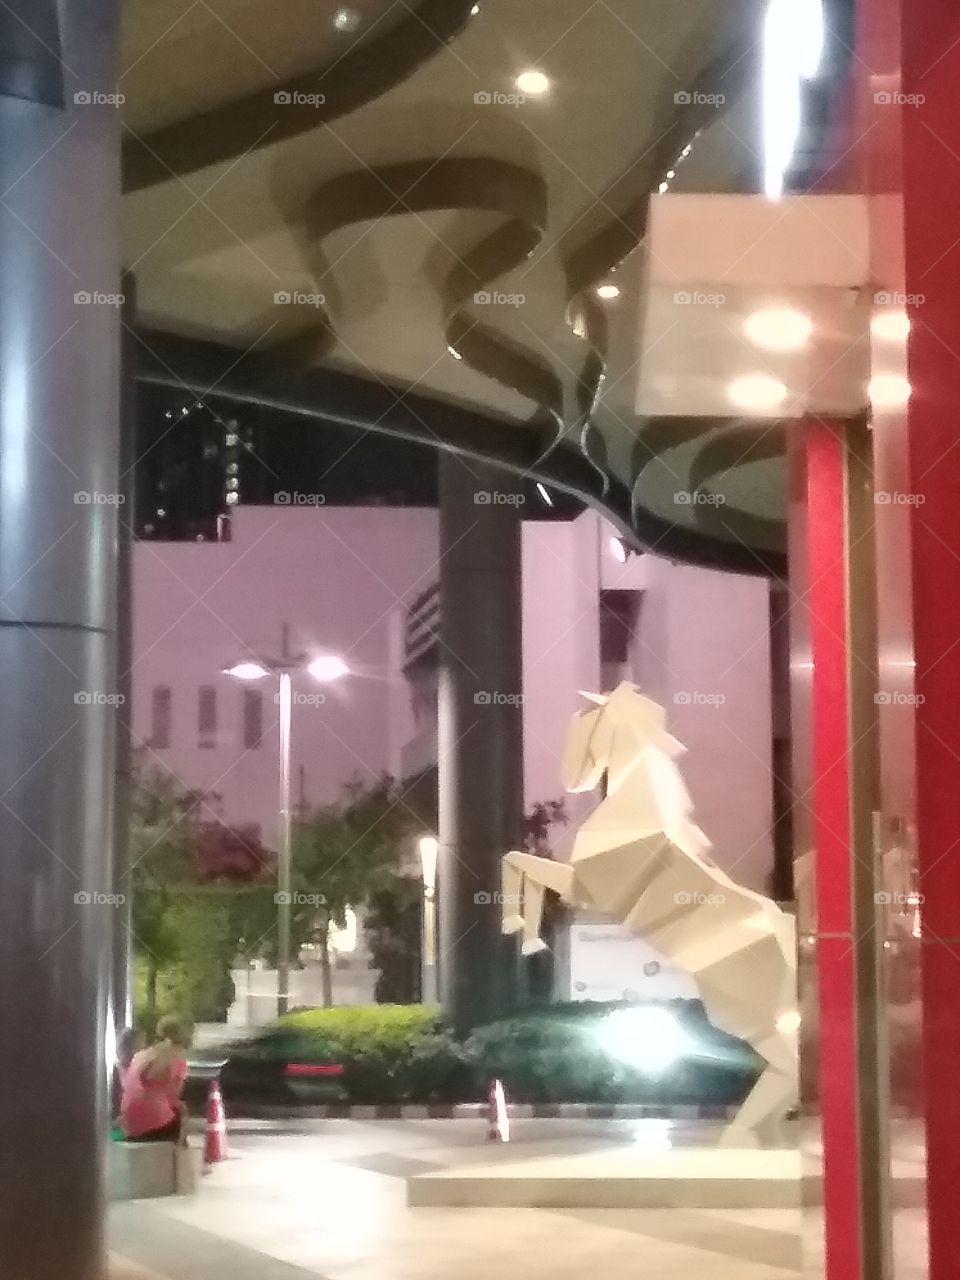 A white horse is about to fly in front of Gateway, Ekamai, Bangkok, Thailand.